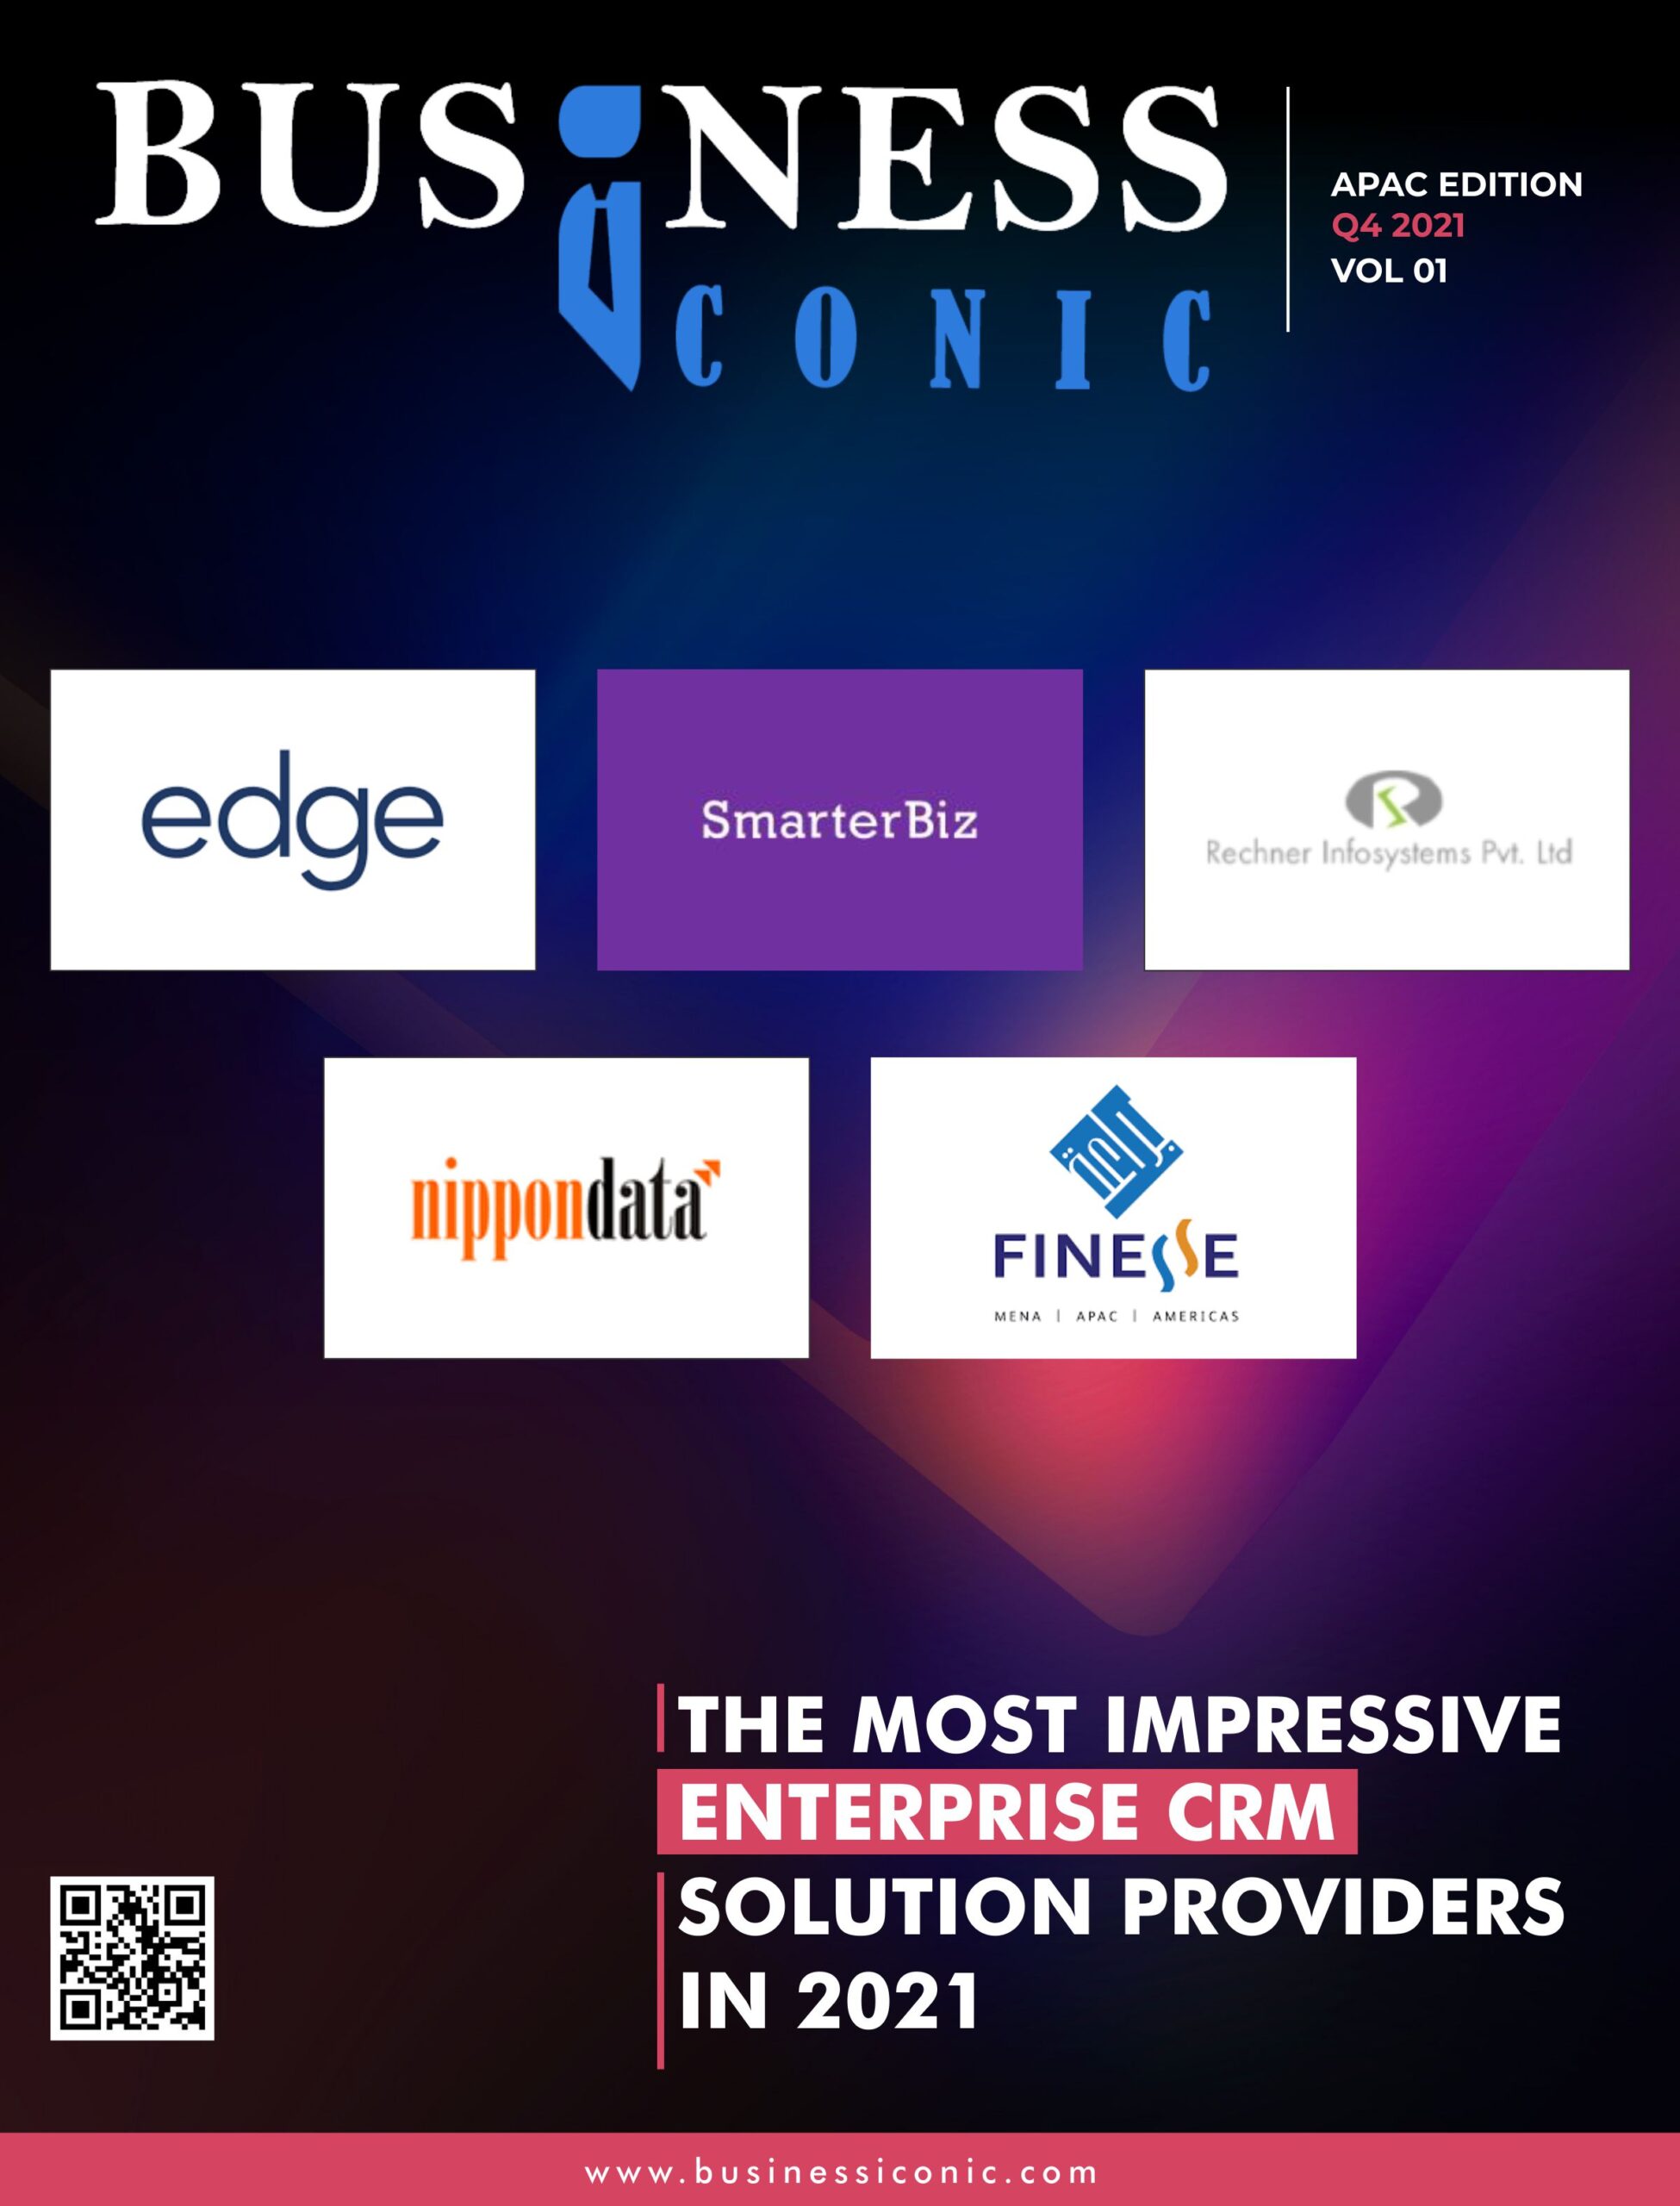 The Most Impressive Enterprise CRM Solution Providers In 2021 | Business Iconic